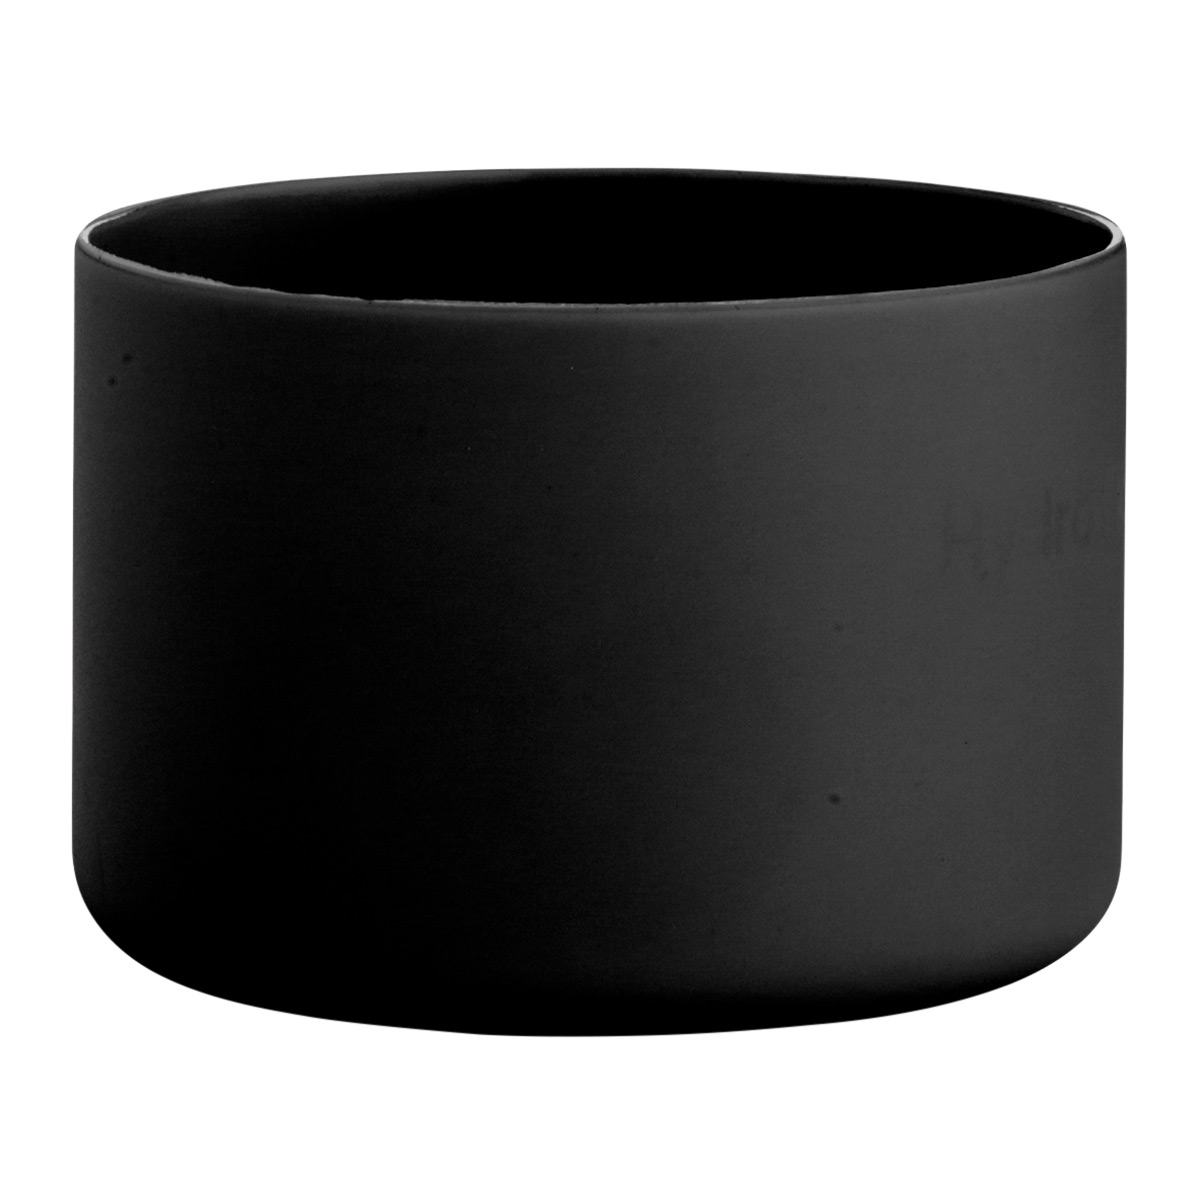 https://www.containerstore.com/catalogimages/434291/10086816-Flex_Boot_Small_Black-VEN.jpg